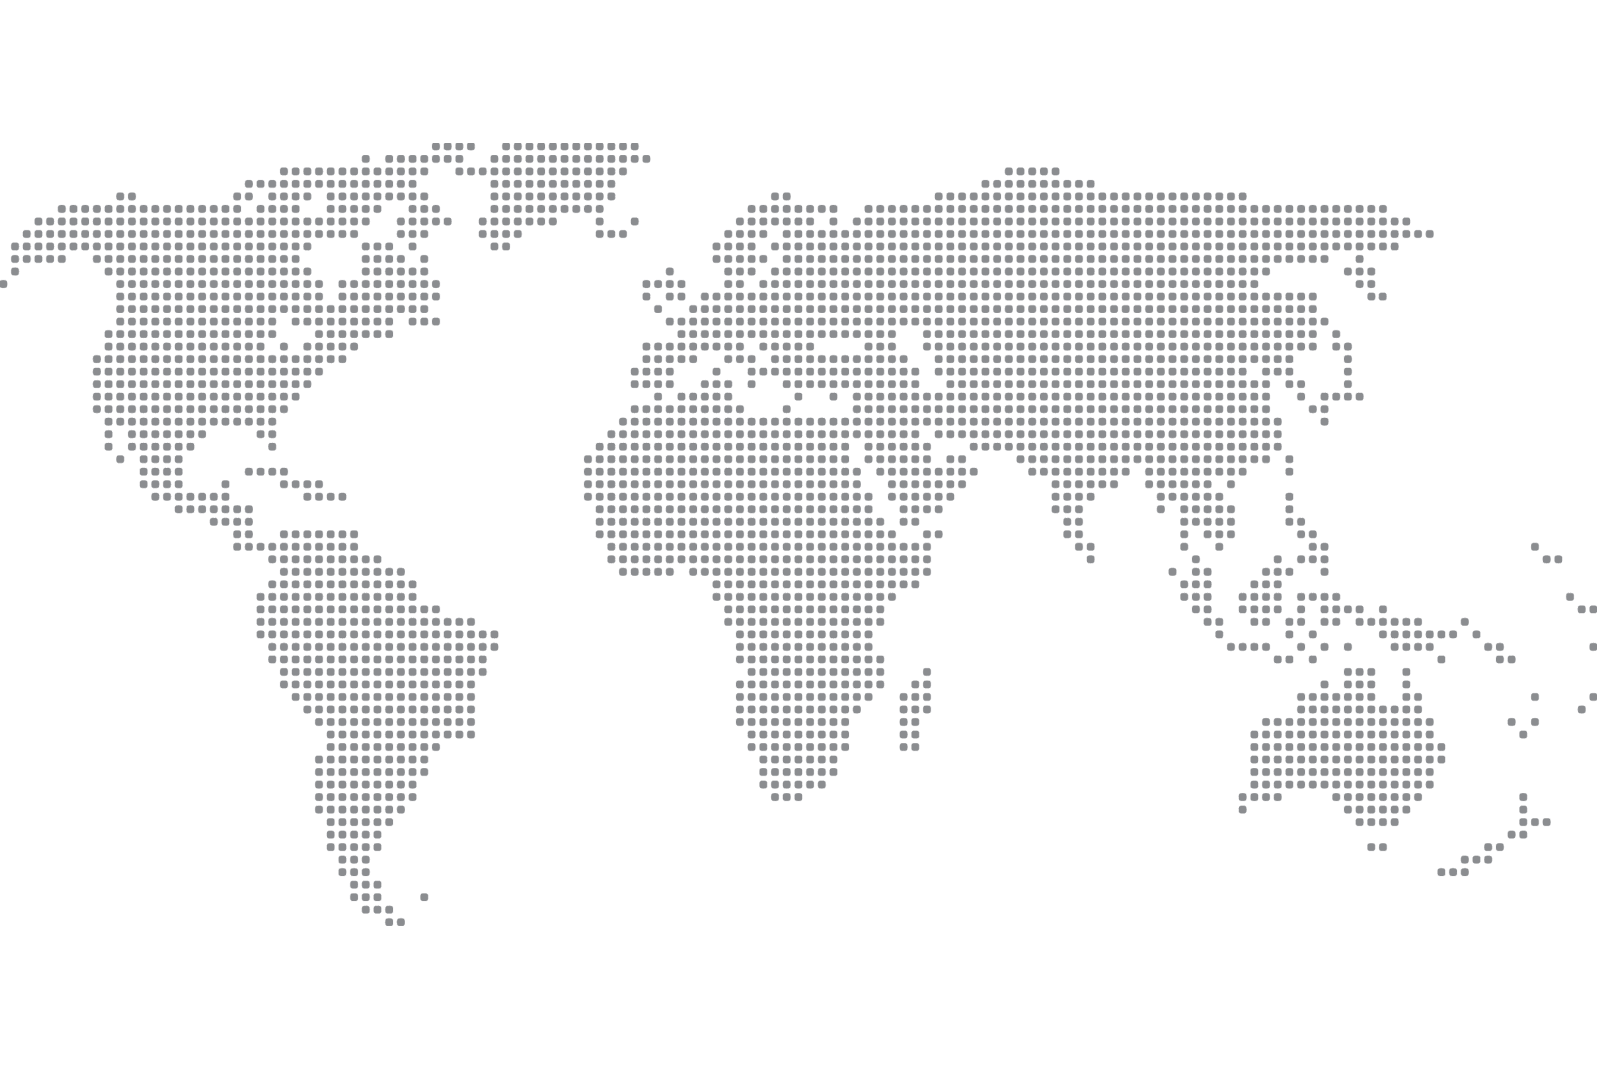 World Map With Transparent Background